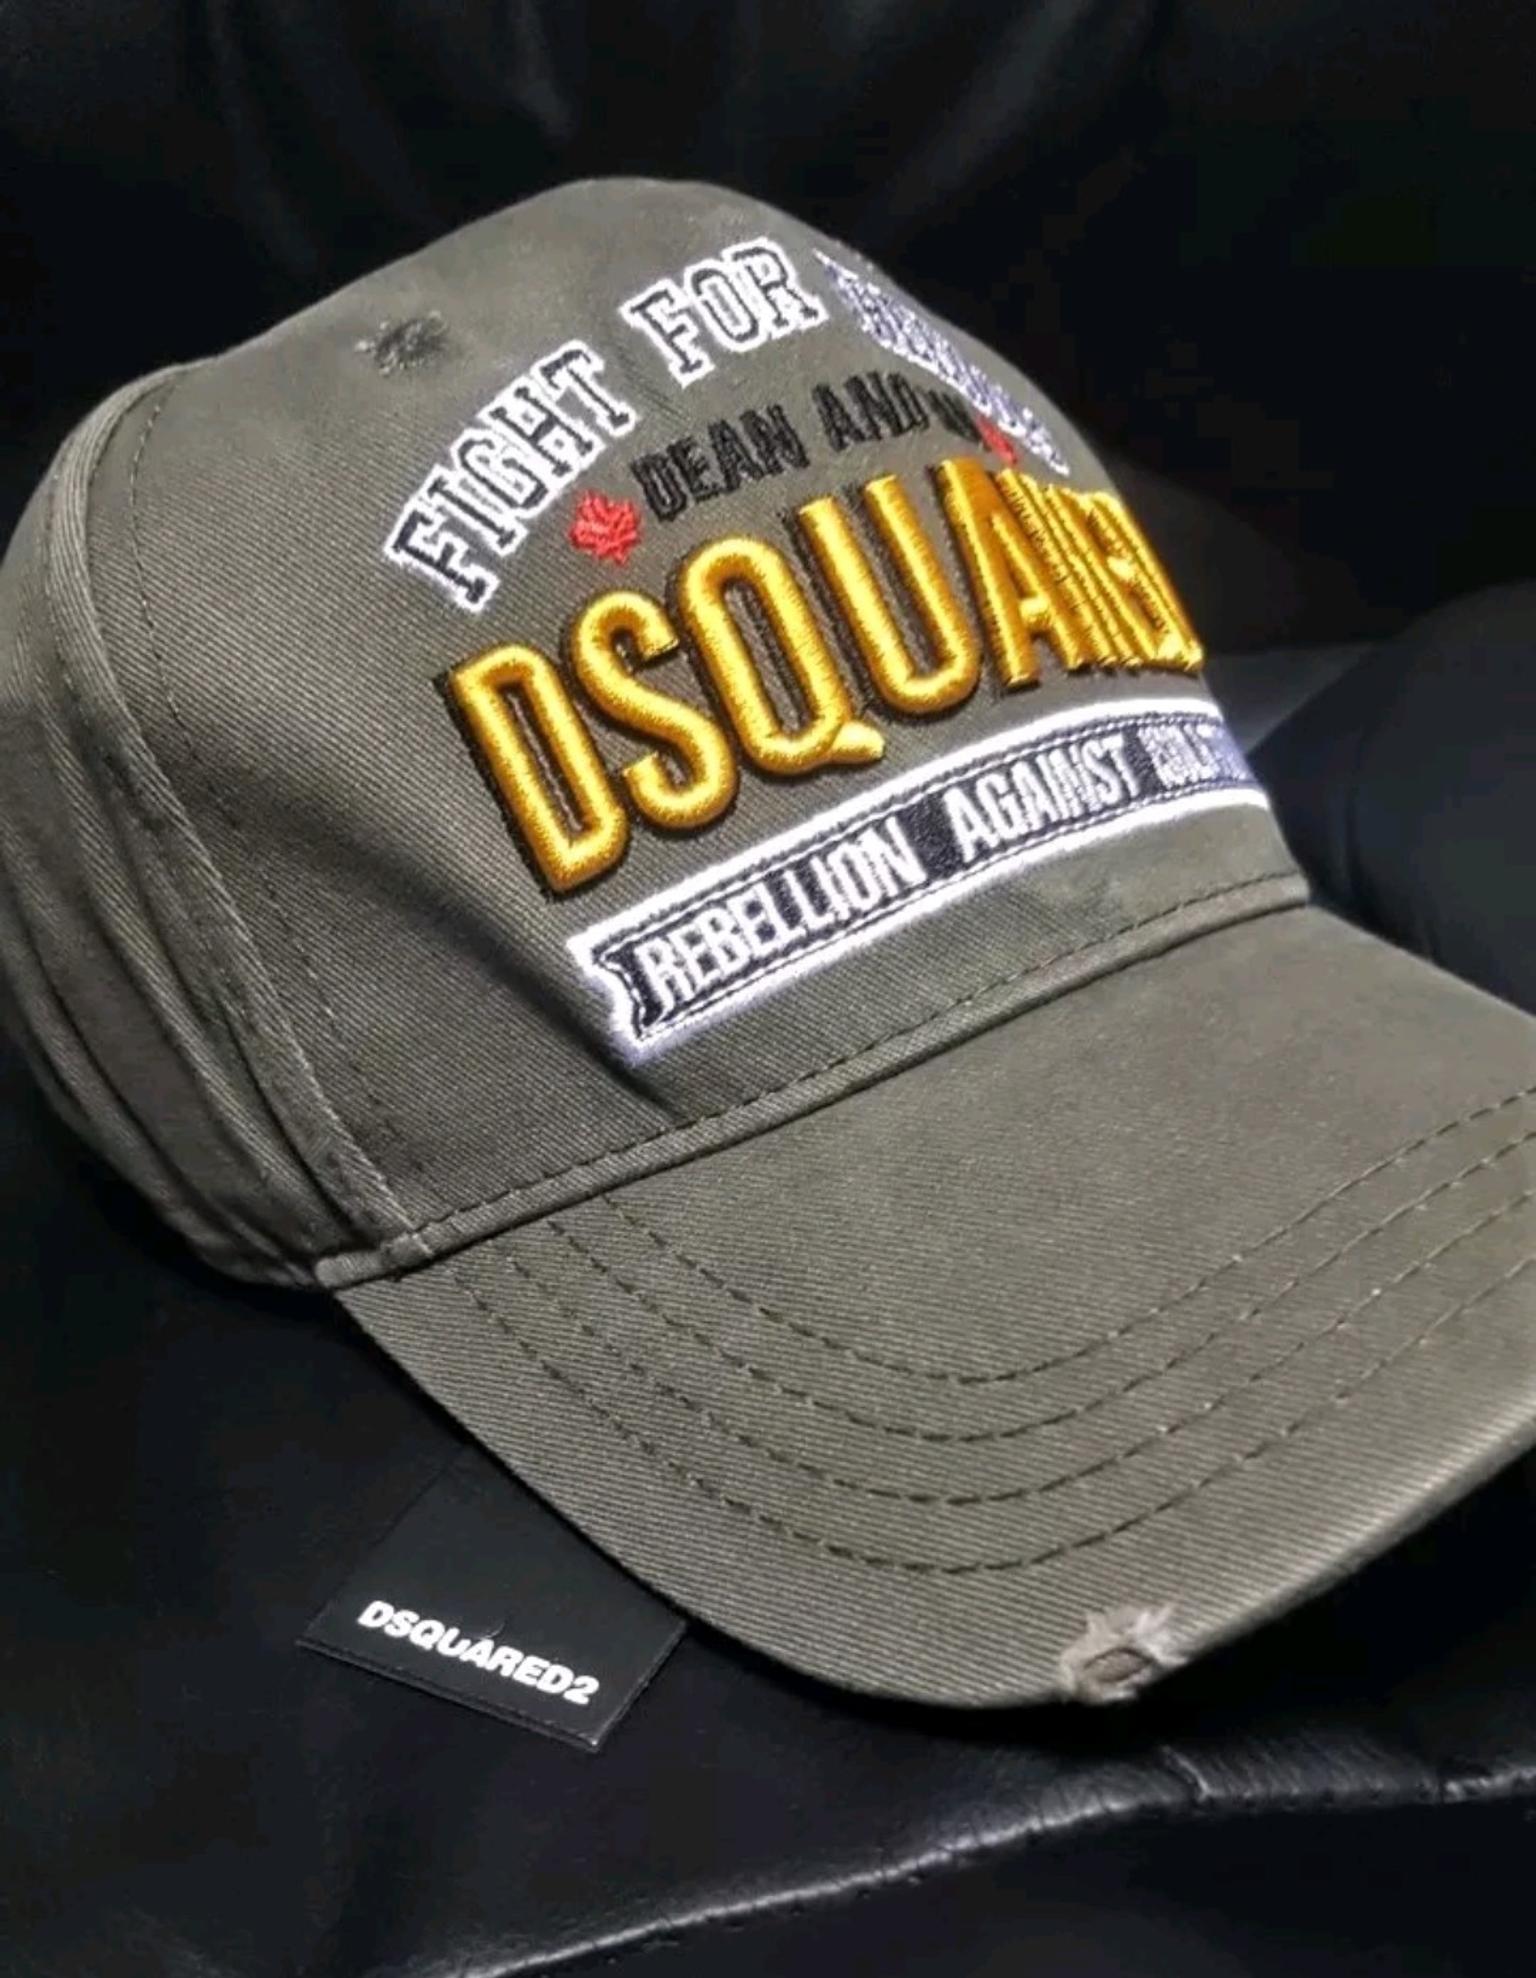 fight for freedom dsquared cap